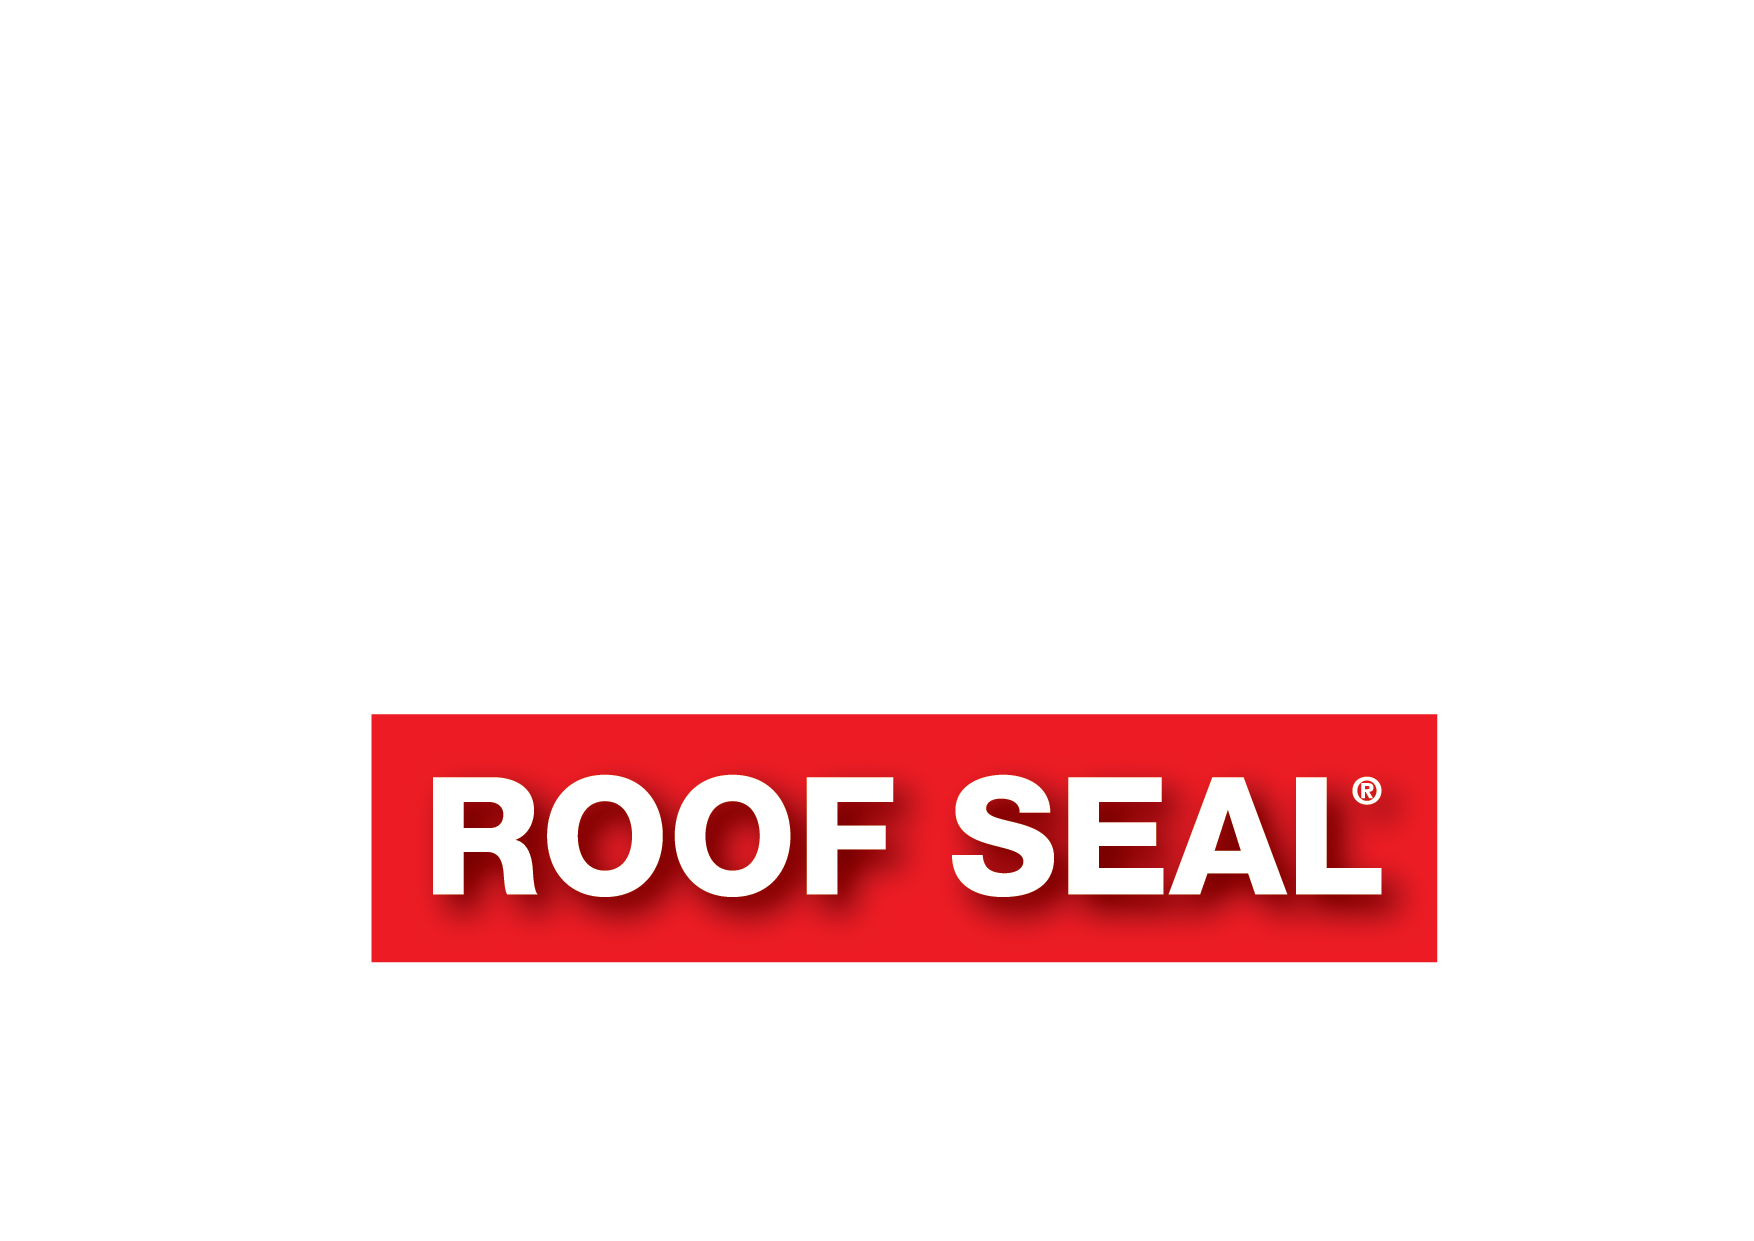 RoofSeal logo